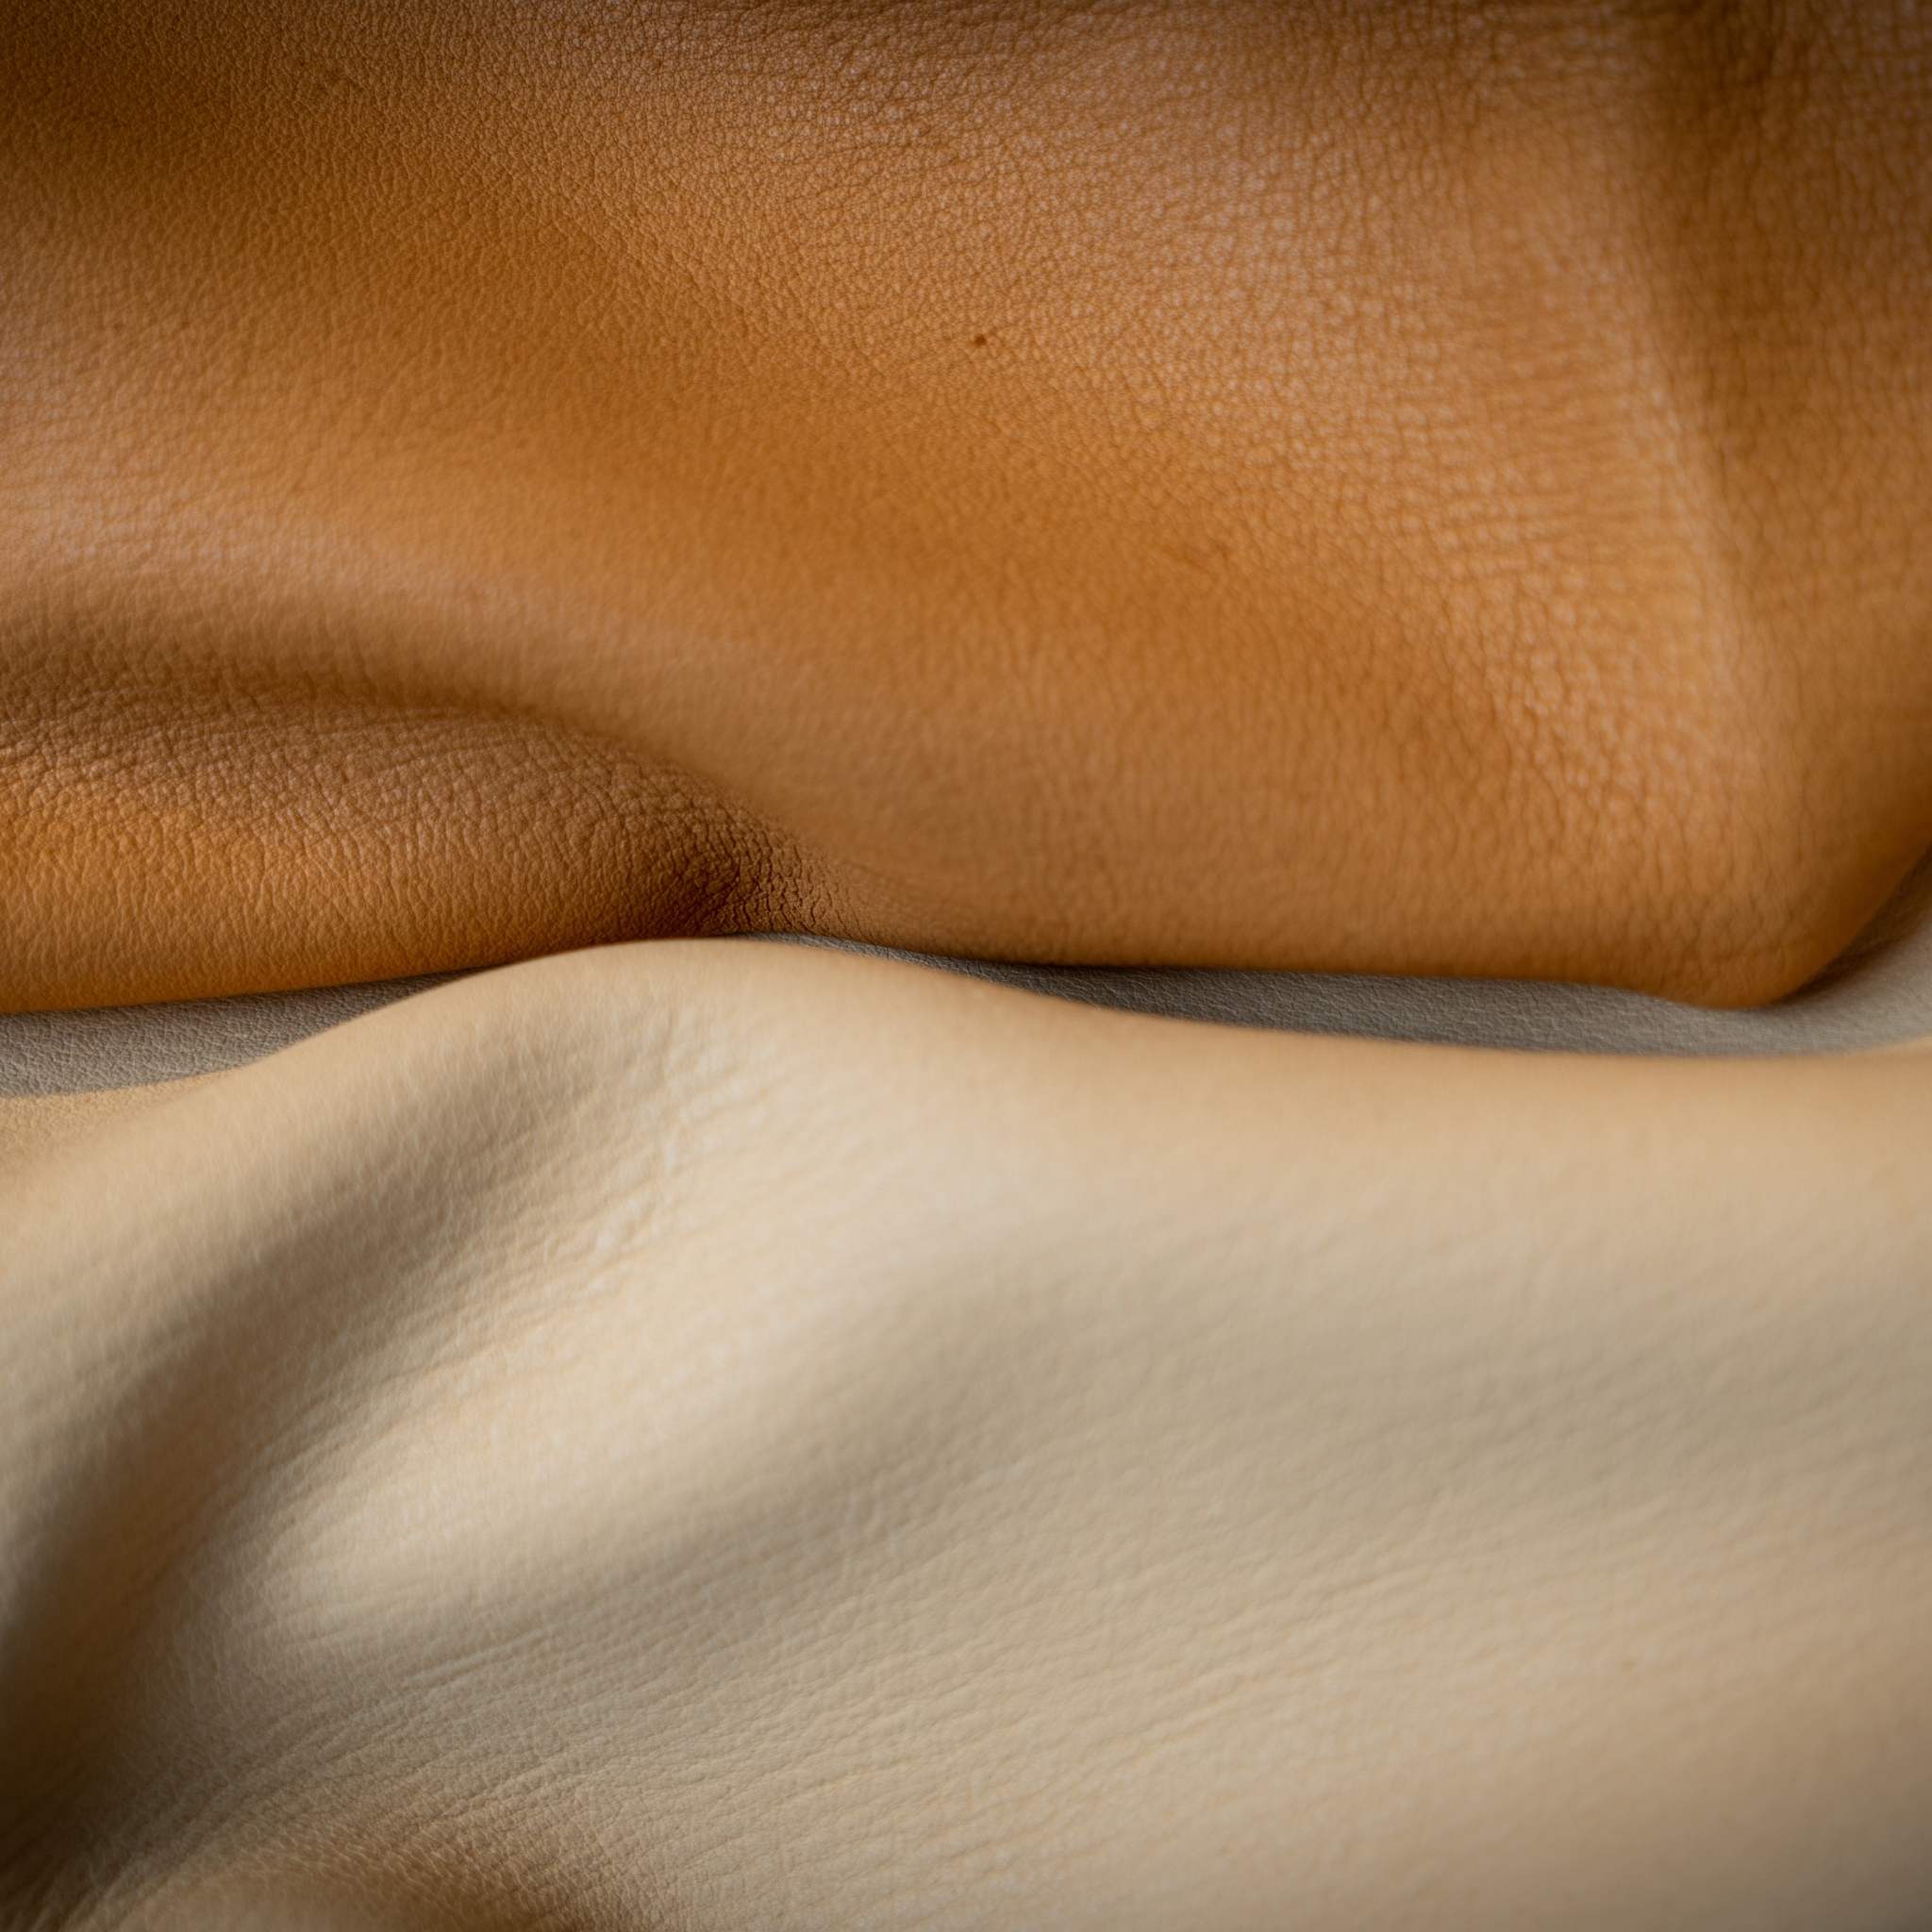 North American deerskin, soft and strong, with a distinctive feel, and grain.  Average size -9-11 sq ft.  1.0-1.2mm (2.5-3oz)   Ideal for clothing, pouches, waistcoats, gloves and gauntlets, moccasins.